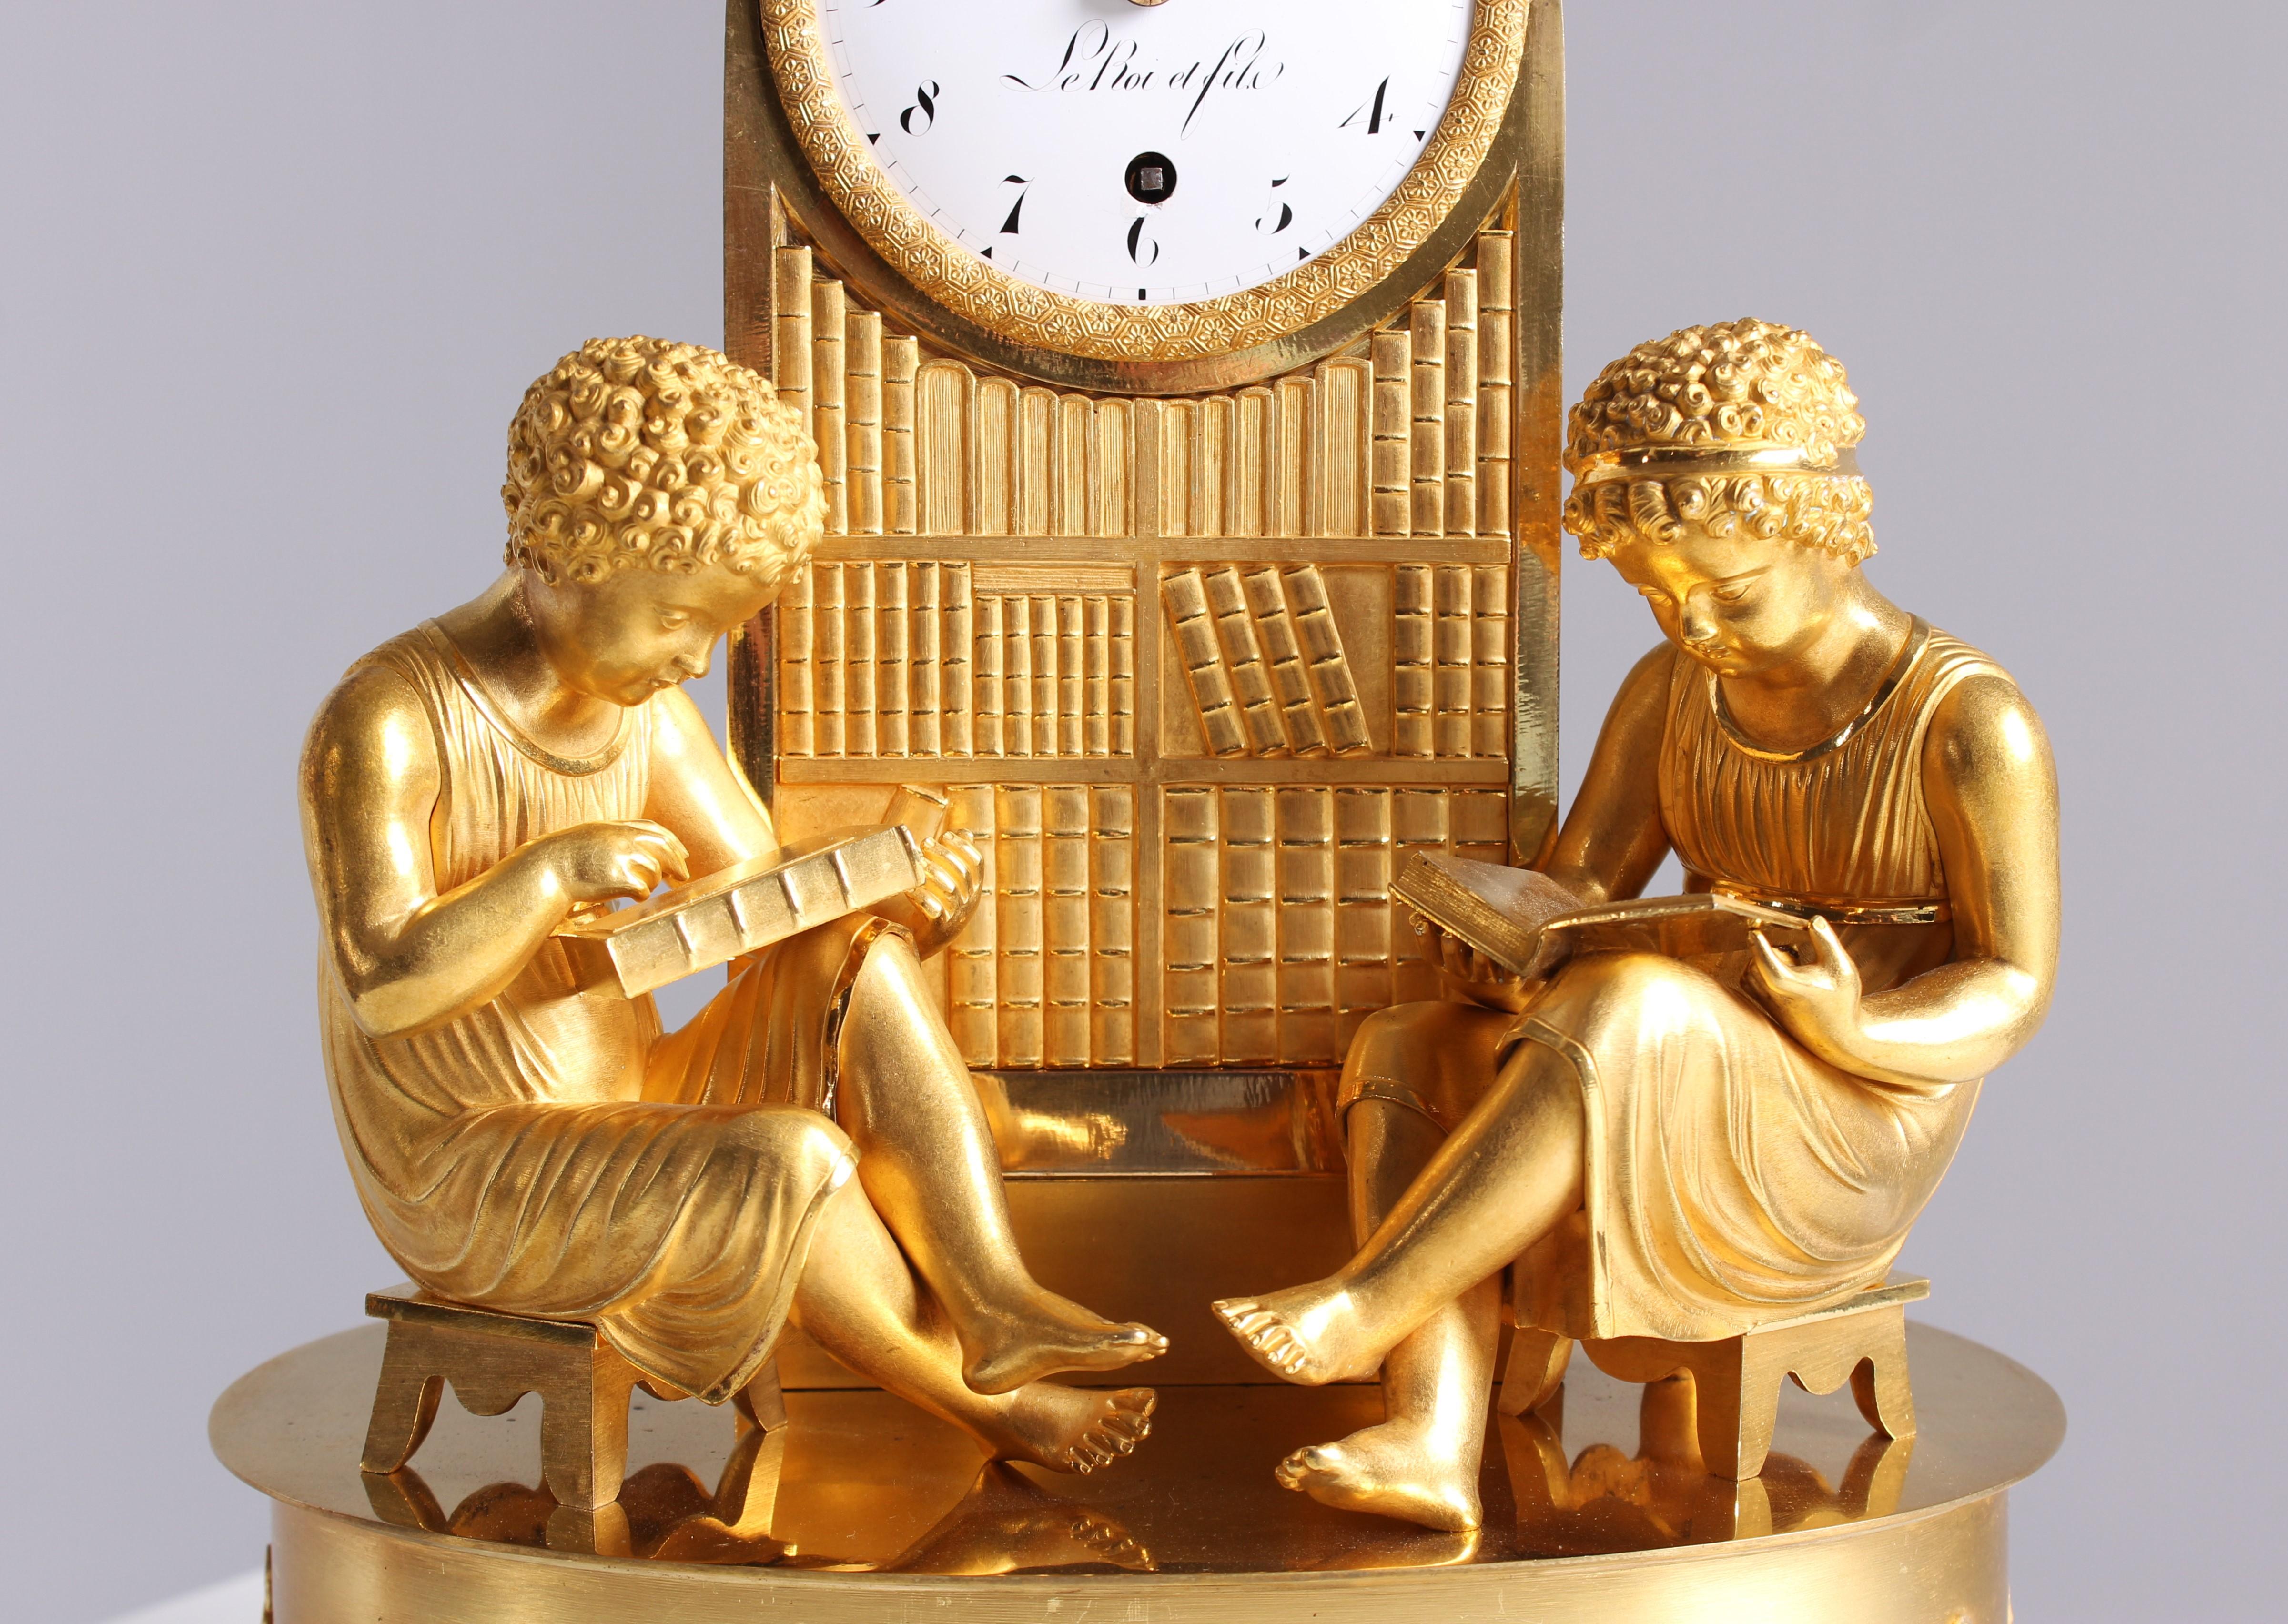 Mantel Clock - La Bibliotheque - In the study room

Paris
fire-gilt bronze, enamel
Empire around 1820

Dimensions: H x W x D: 38 x 28 x 19 cm

Description:
Scenery mounted on an oval base decorated with applied flower garlands. Two children, seated